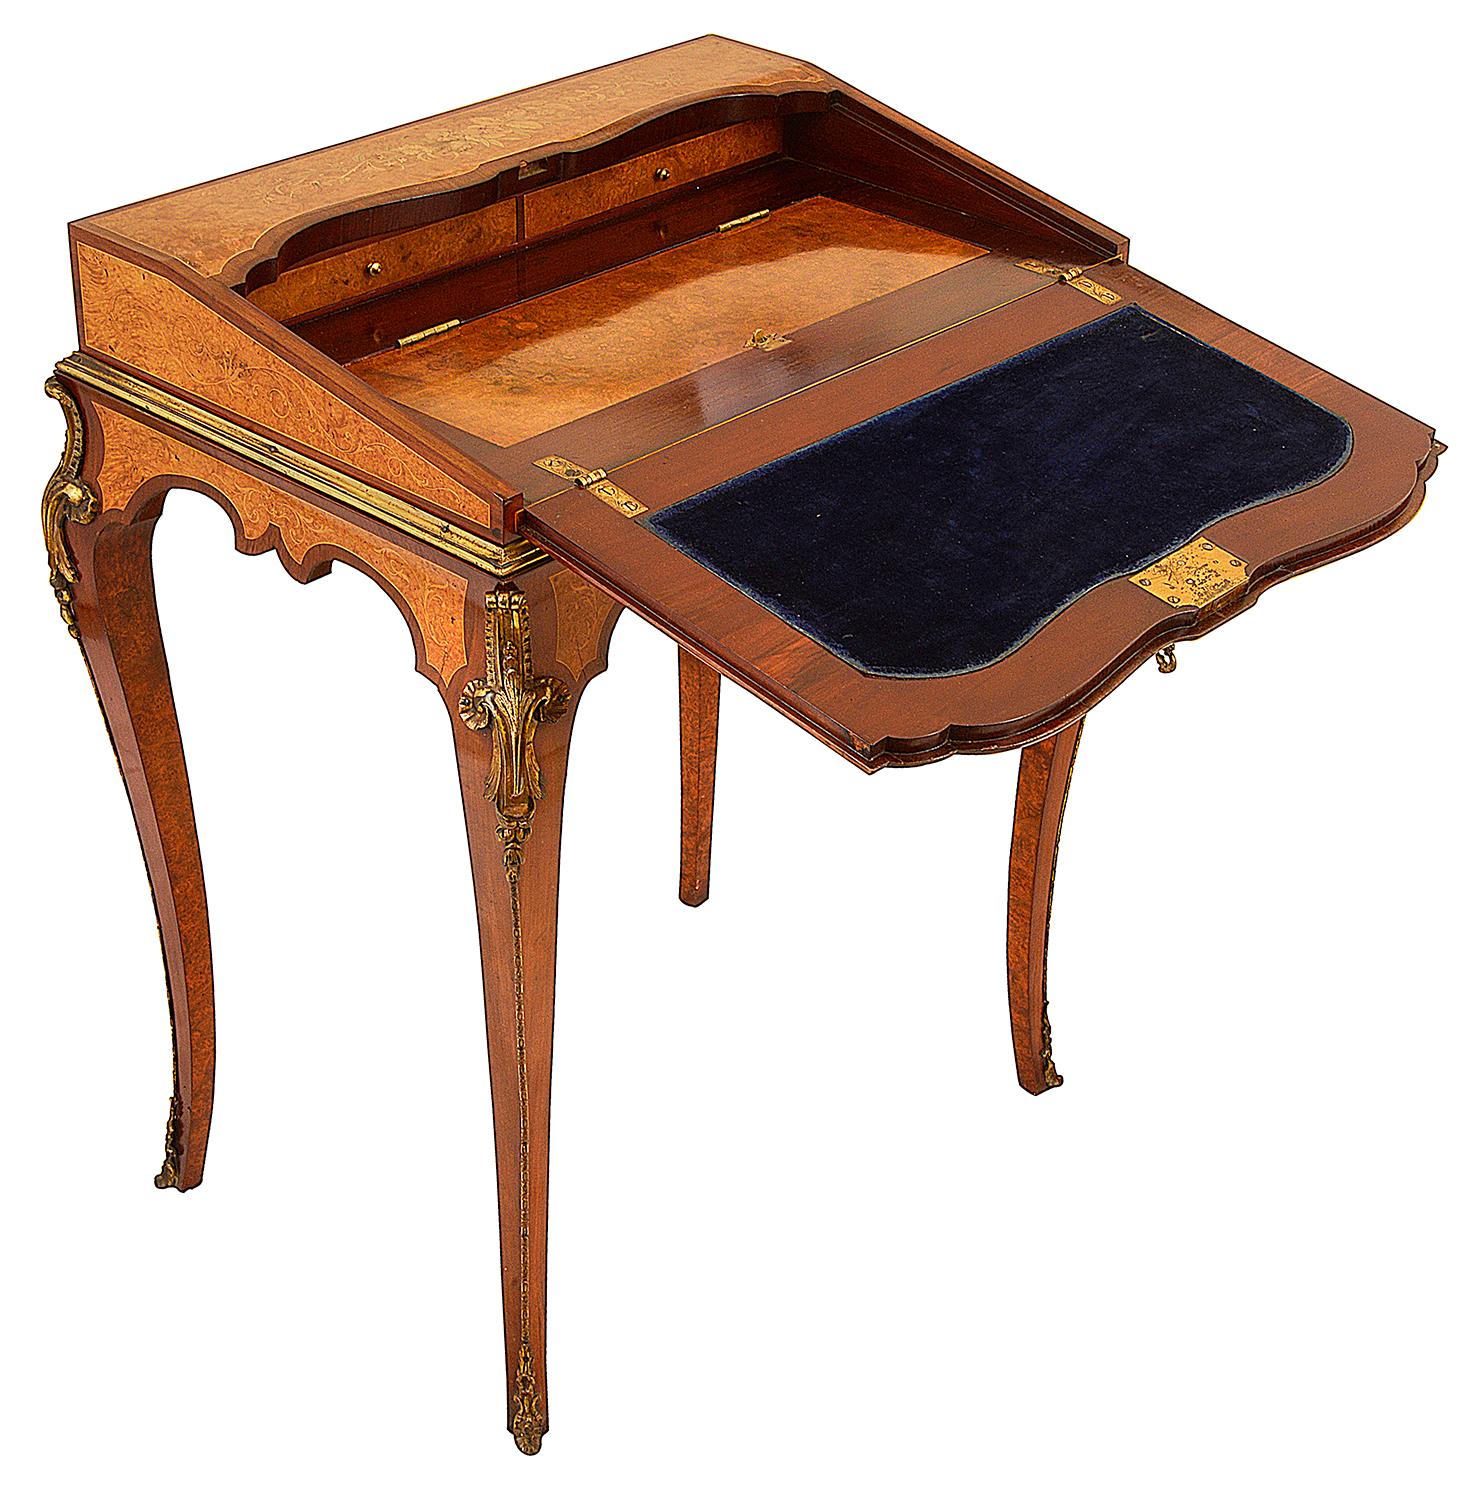 French 19th Century ladies fall front bureau de dame, having wonderful Amboyna, veneers with classical Boxwood inlay to the centre depicting a classical urn with over flowing flowers. Opening to reveal an inset writing tablet, drawers and pigeon